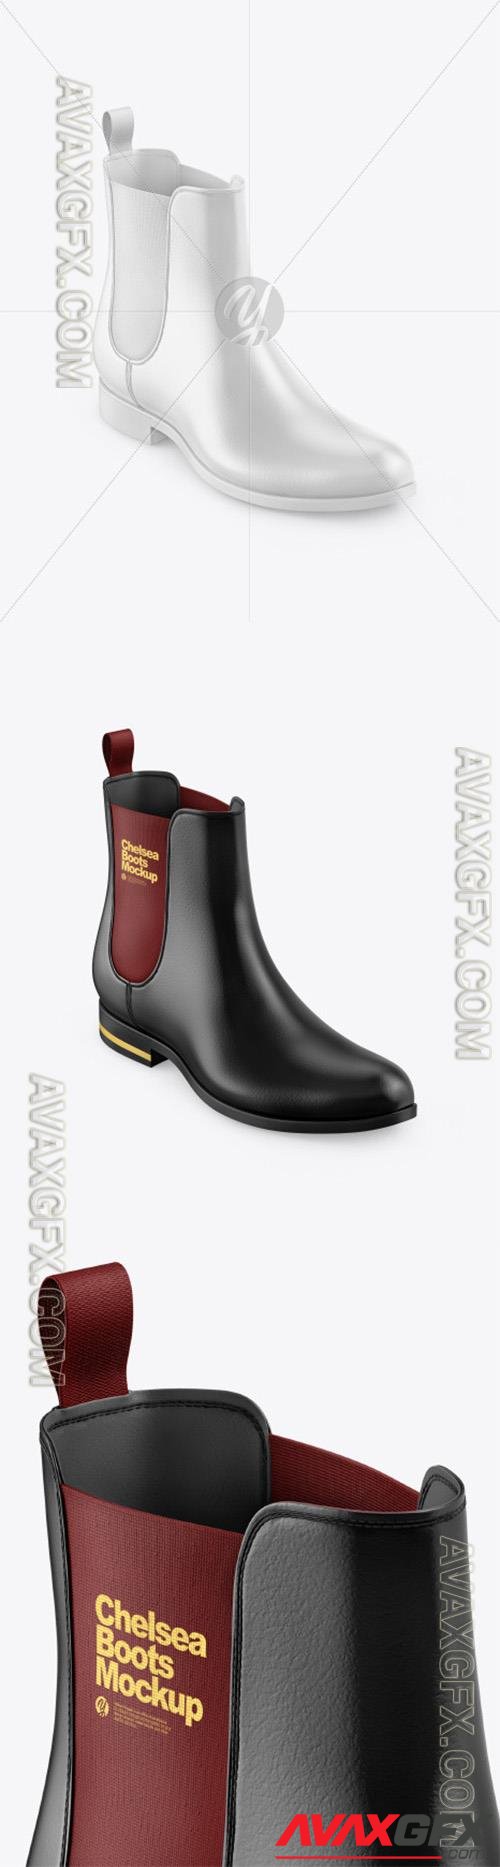 Glossy Leather Chelsea Boot Mockup 73716